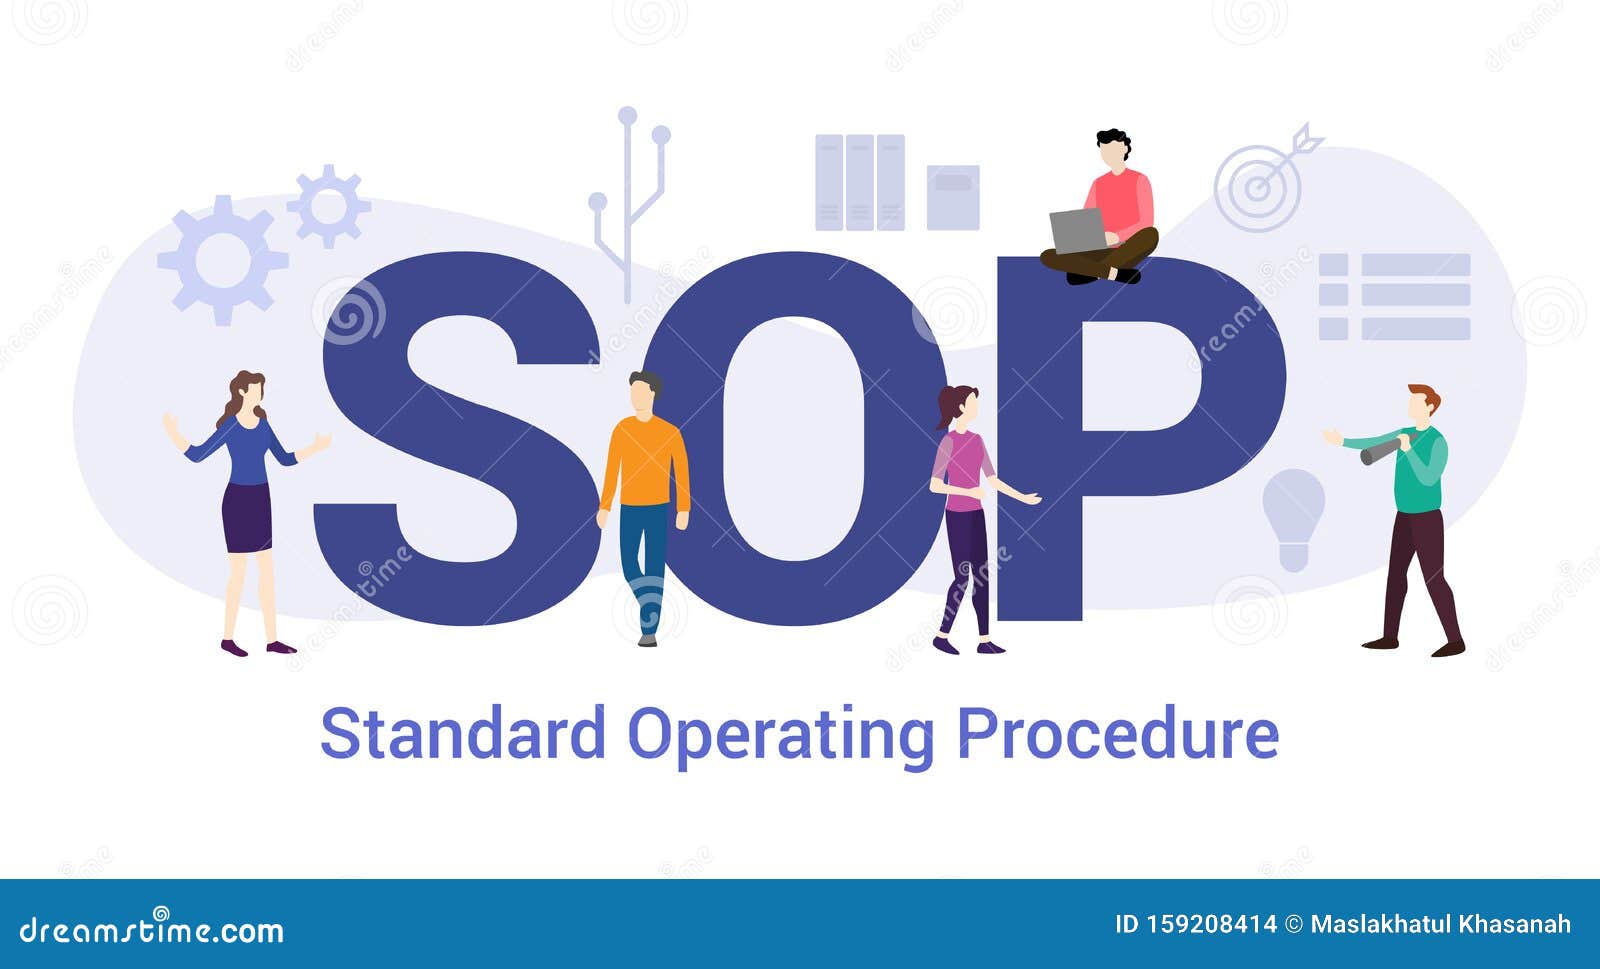 sop standard operating procedure concept with big word or text and team people with modern flat style - 